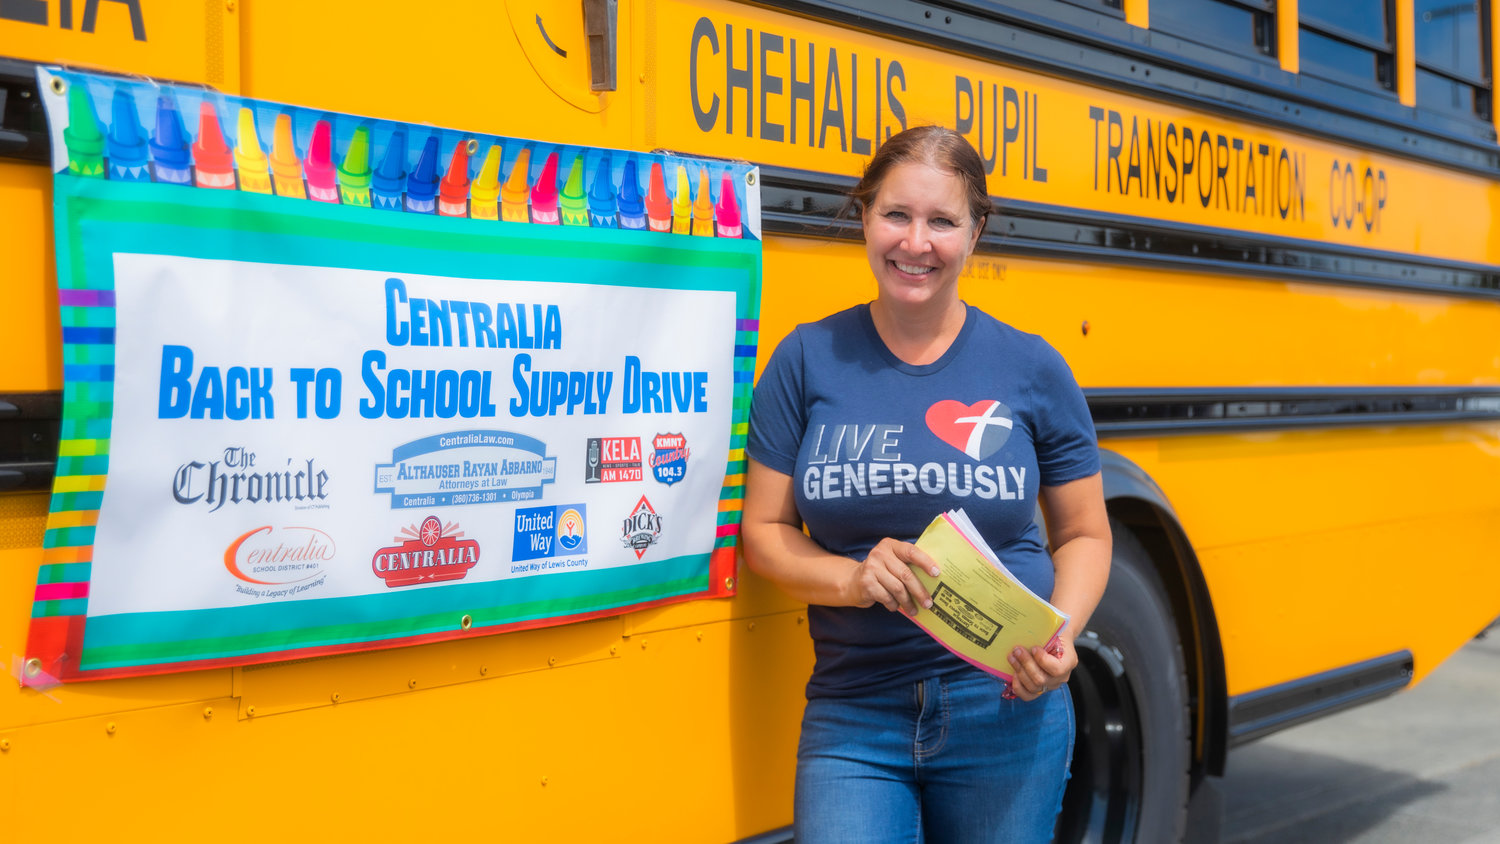 Middle school teacher Holly Abbarno poses for a photo at the Centralia Back to School Supply Drive at Walmart in Chehalis Friday. The drive will continue Saturday from 8 a.m. to 5 p.m.